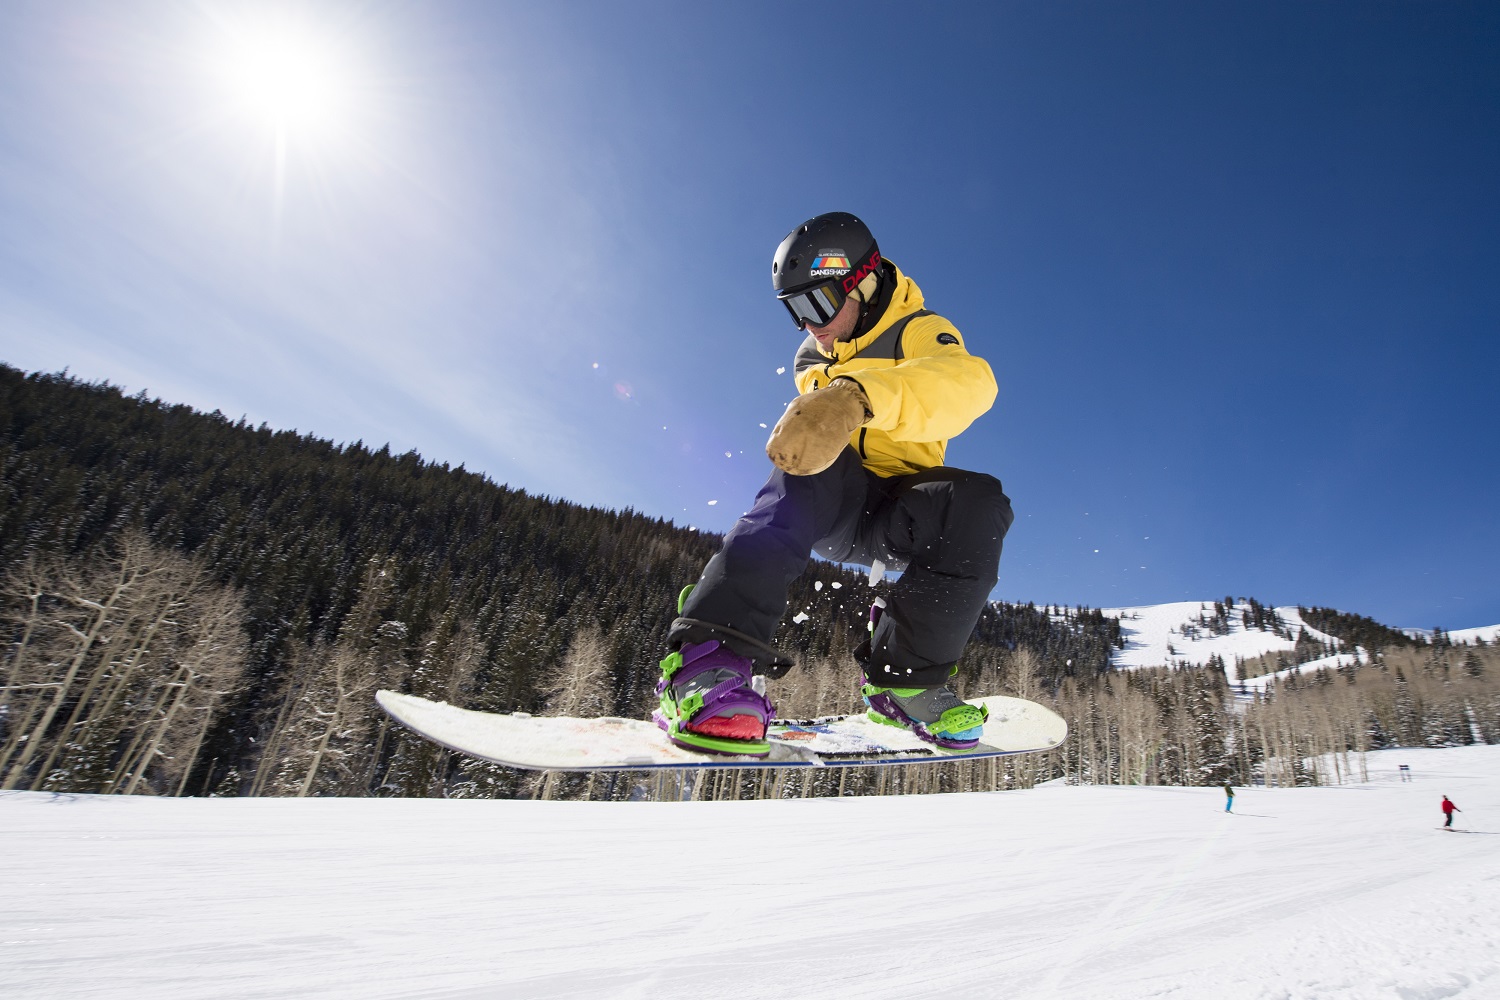 A Guide to Snowboarding Terminology